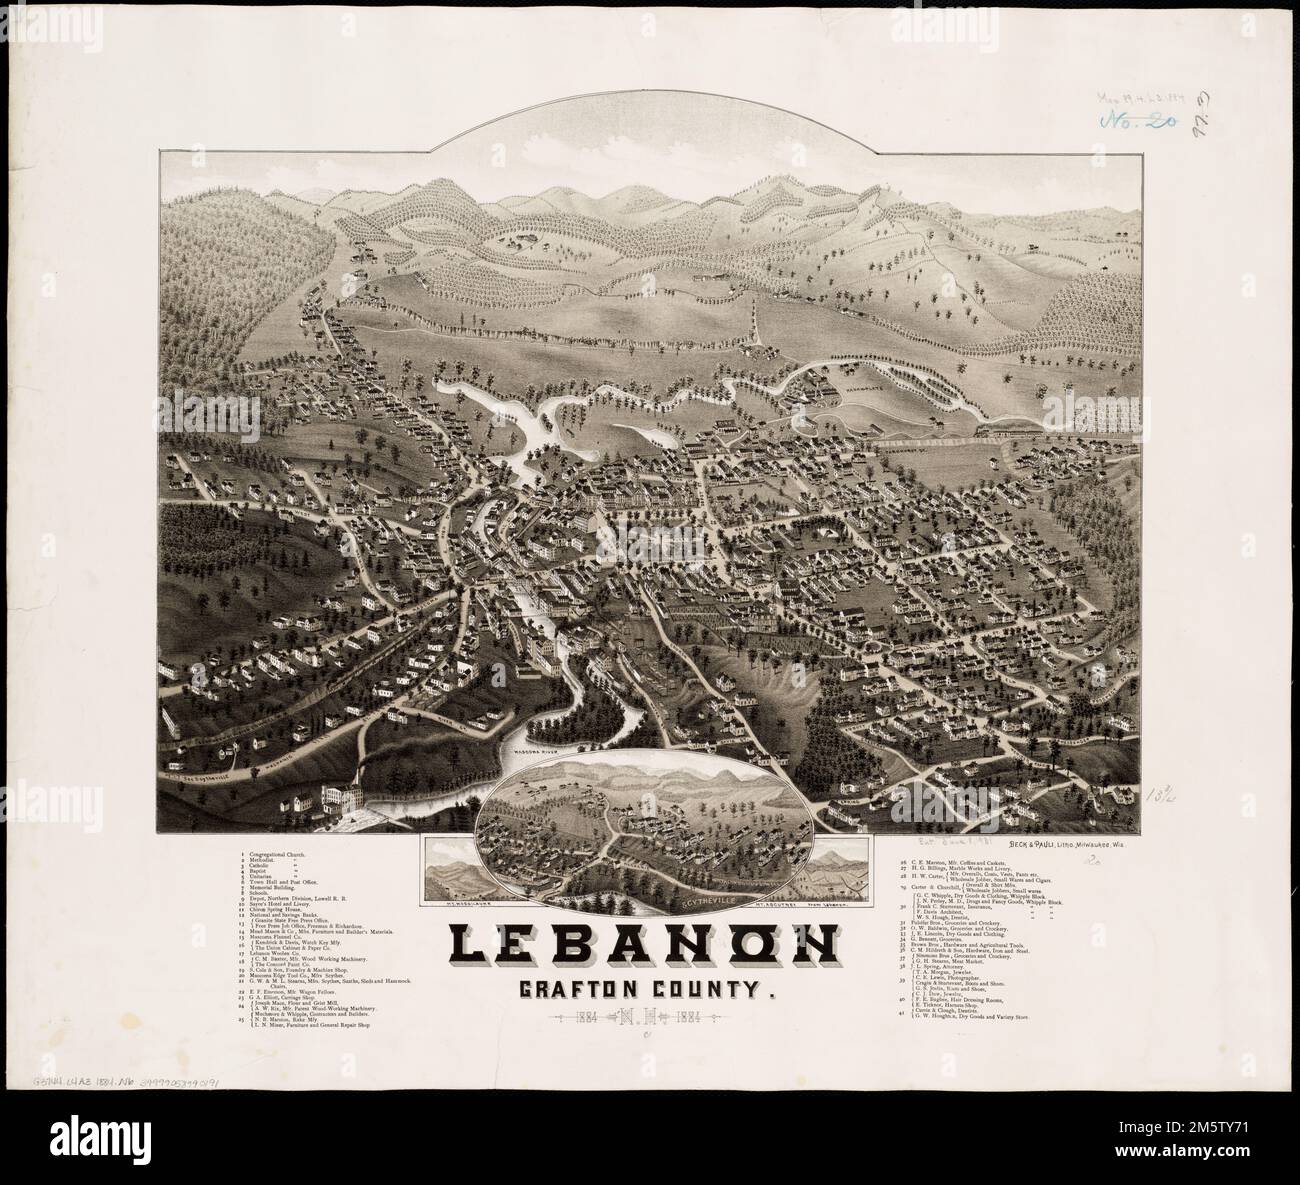 Lebanon, Grafton County, N.H : 1884. Bird's-eye view. Relief shown pictorially. Includes index to points of interest. Insets: [View of Scytheville] -- [View of Mt. Moosilauke] -- [View of Mt. Ascutney from Lebanon]... Lebanon, Grafton County, New Hampshire, 1884. Lebanon, Grafton County, New Hampshire, 1884, New Hampshire  , Grafton  ,county   , Lebanon Stock Photo